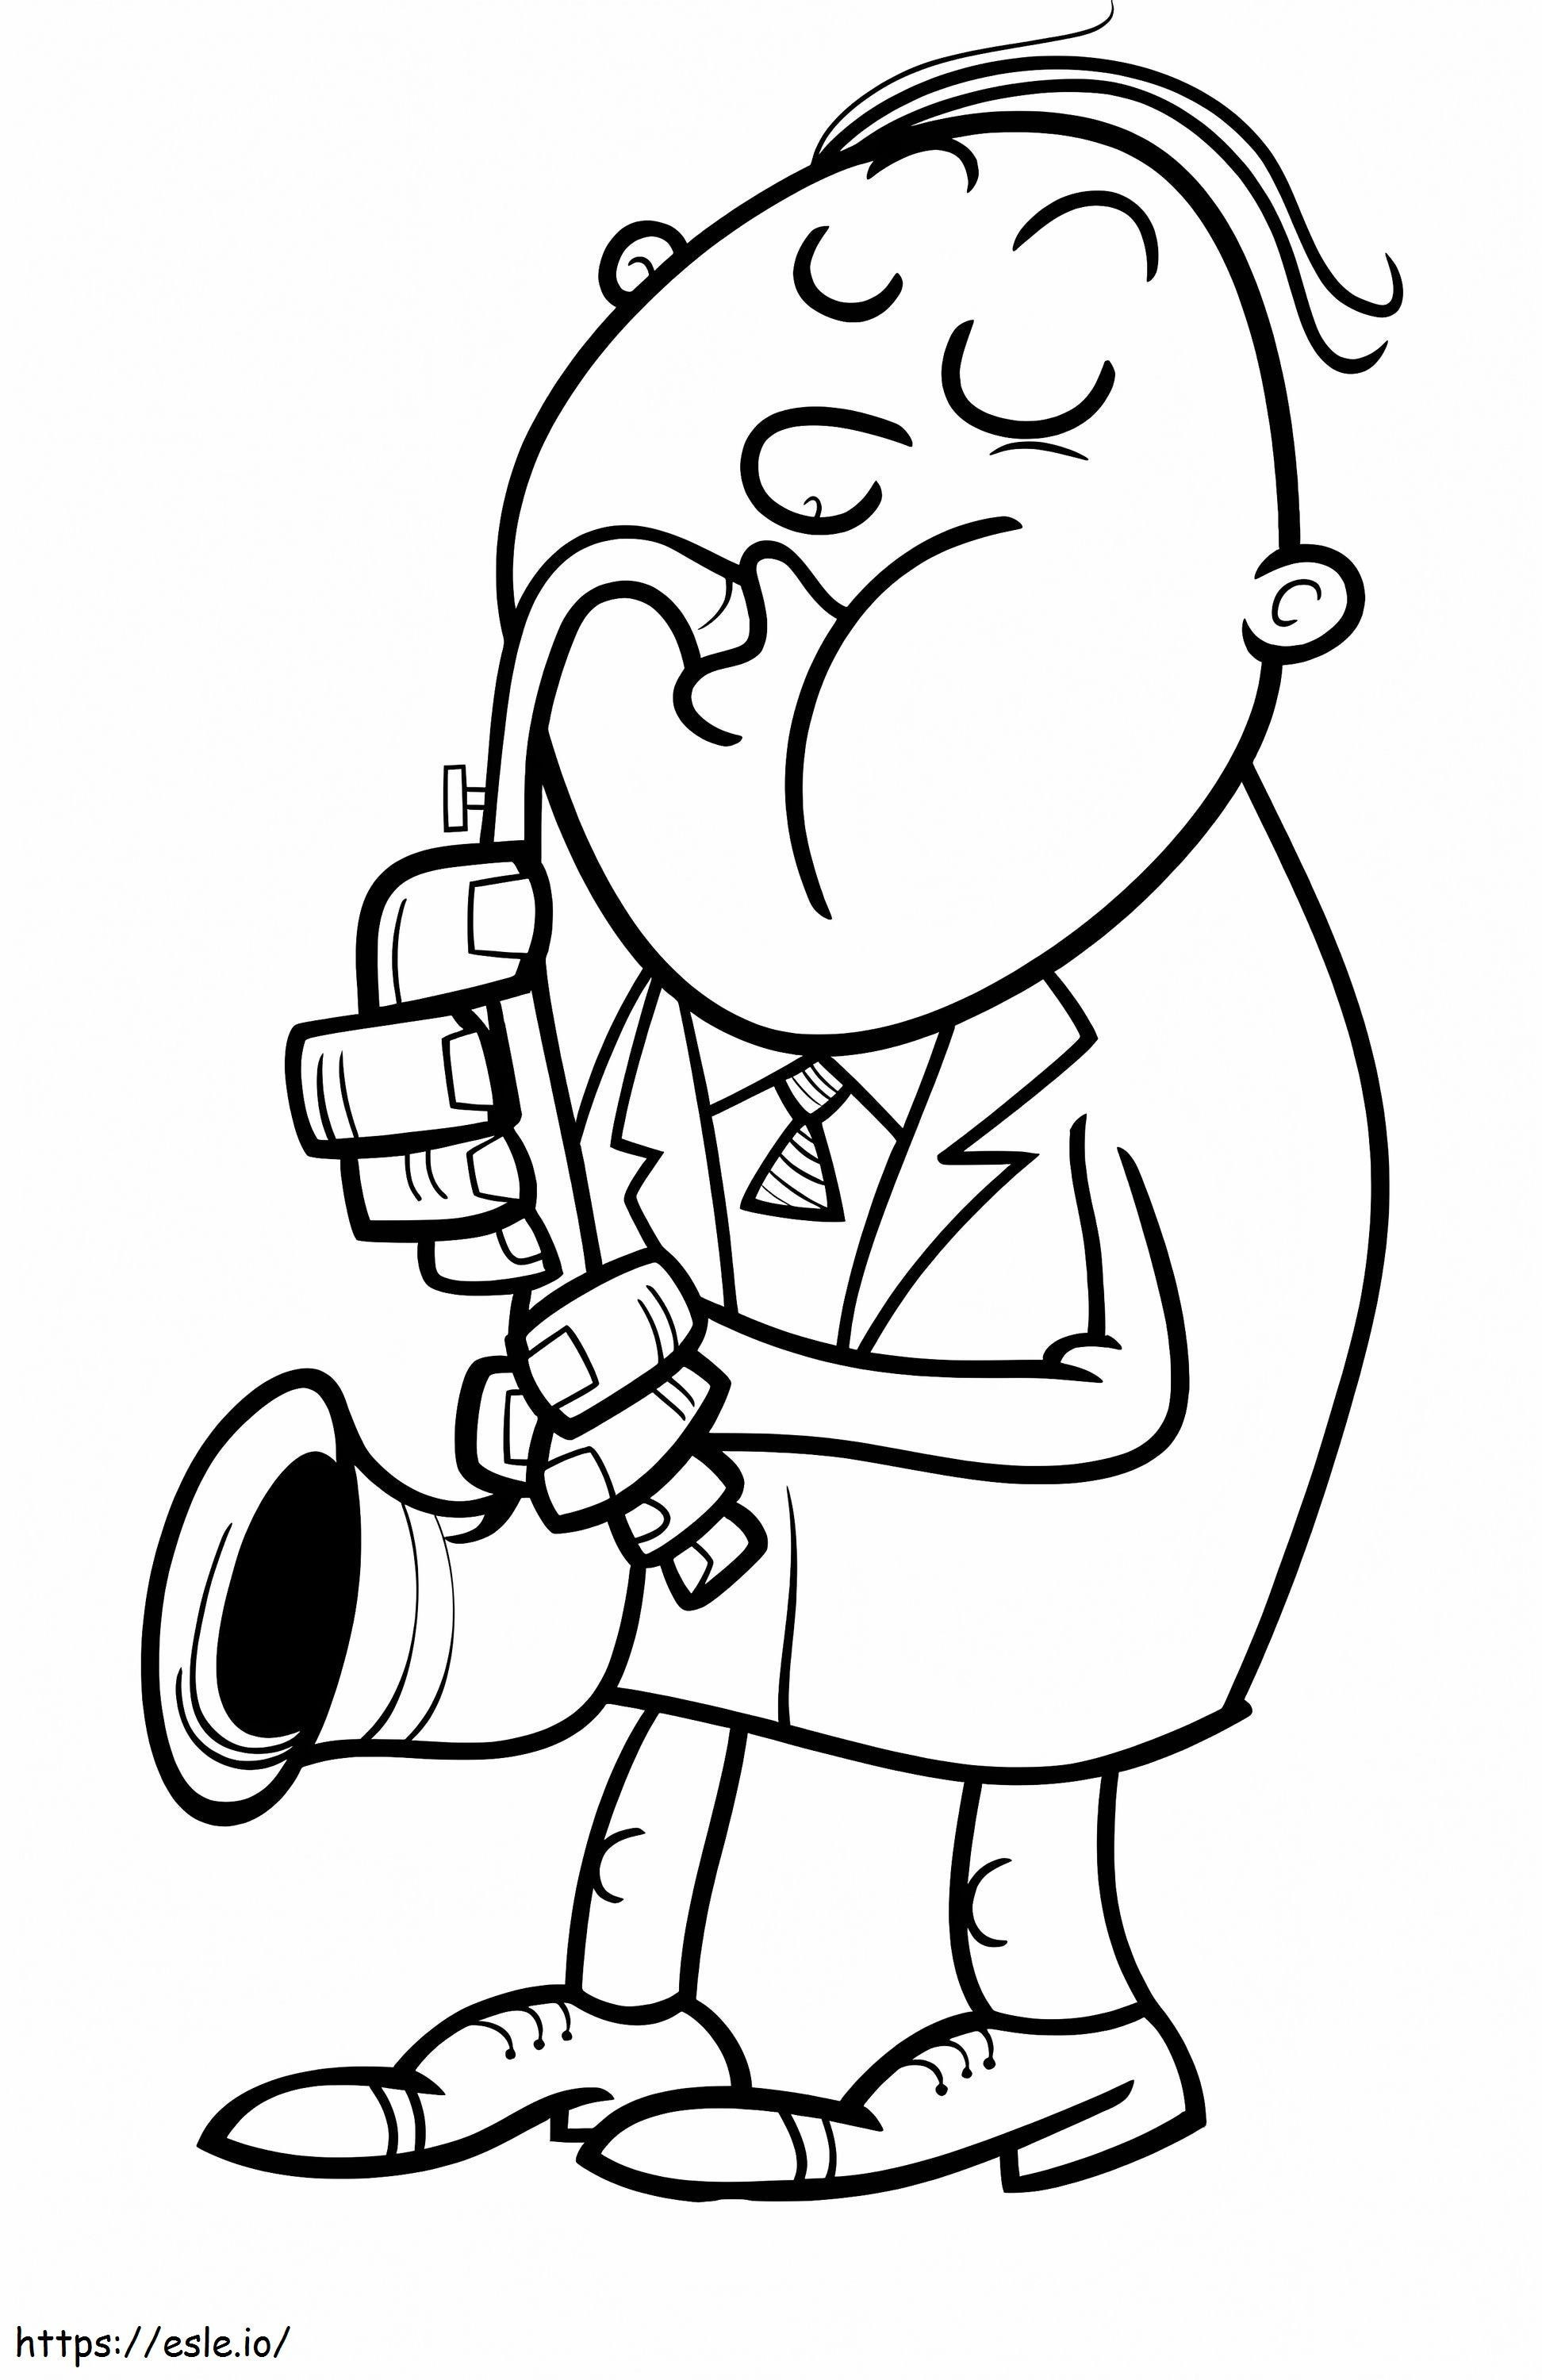 Man With Saxophone coloring page